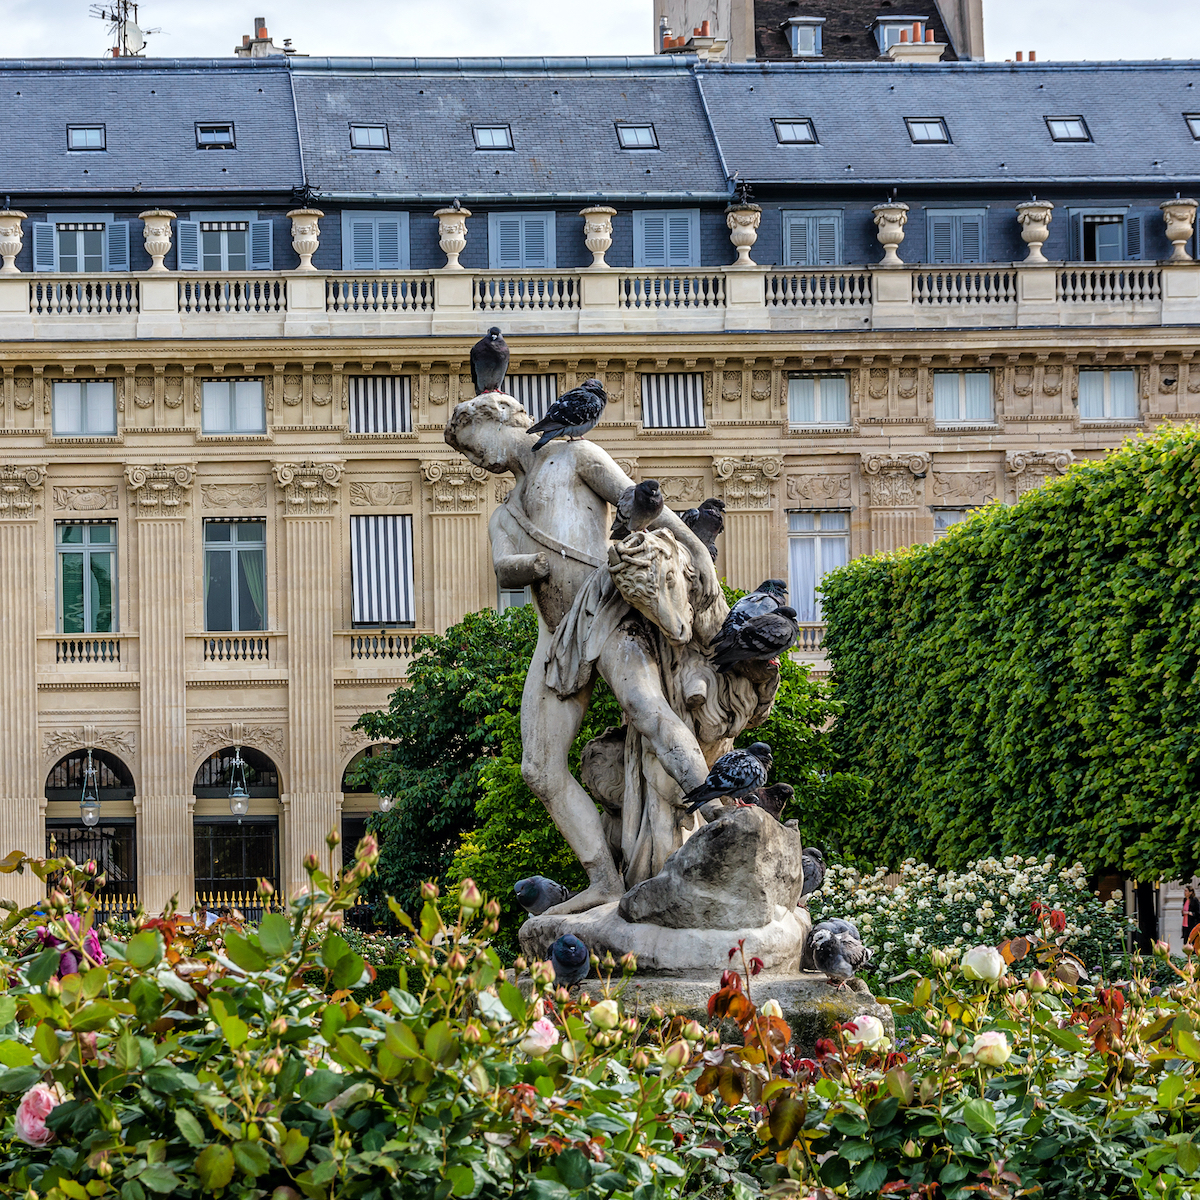 The Palais Royal, a place of charm and culture